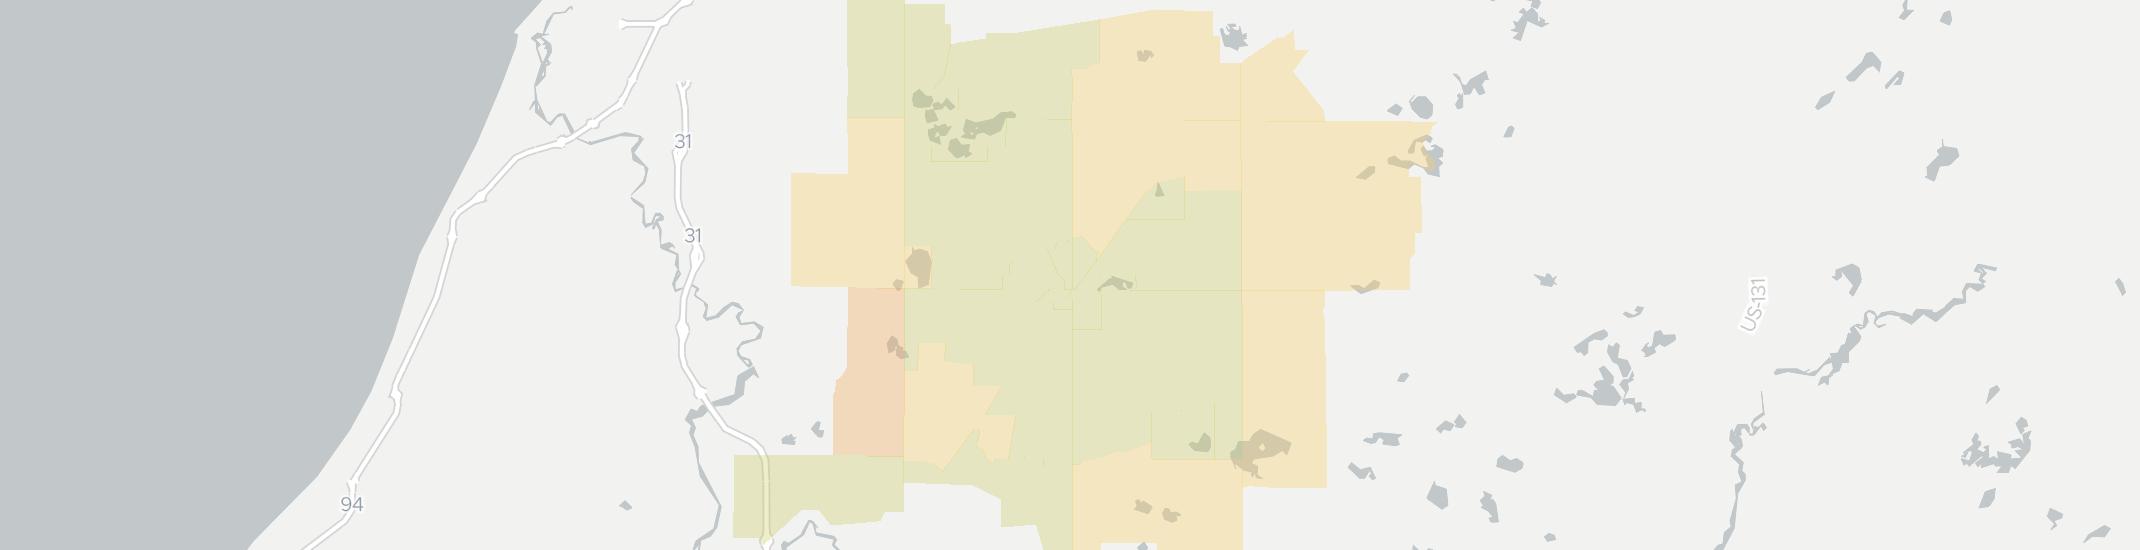 Dowagiac Internet Competition Map. Click for interactive map.